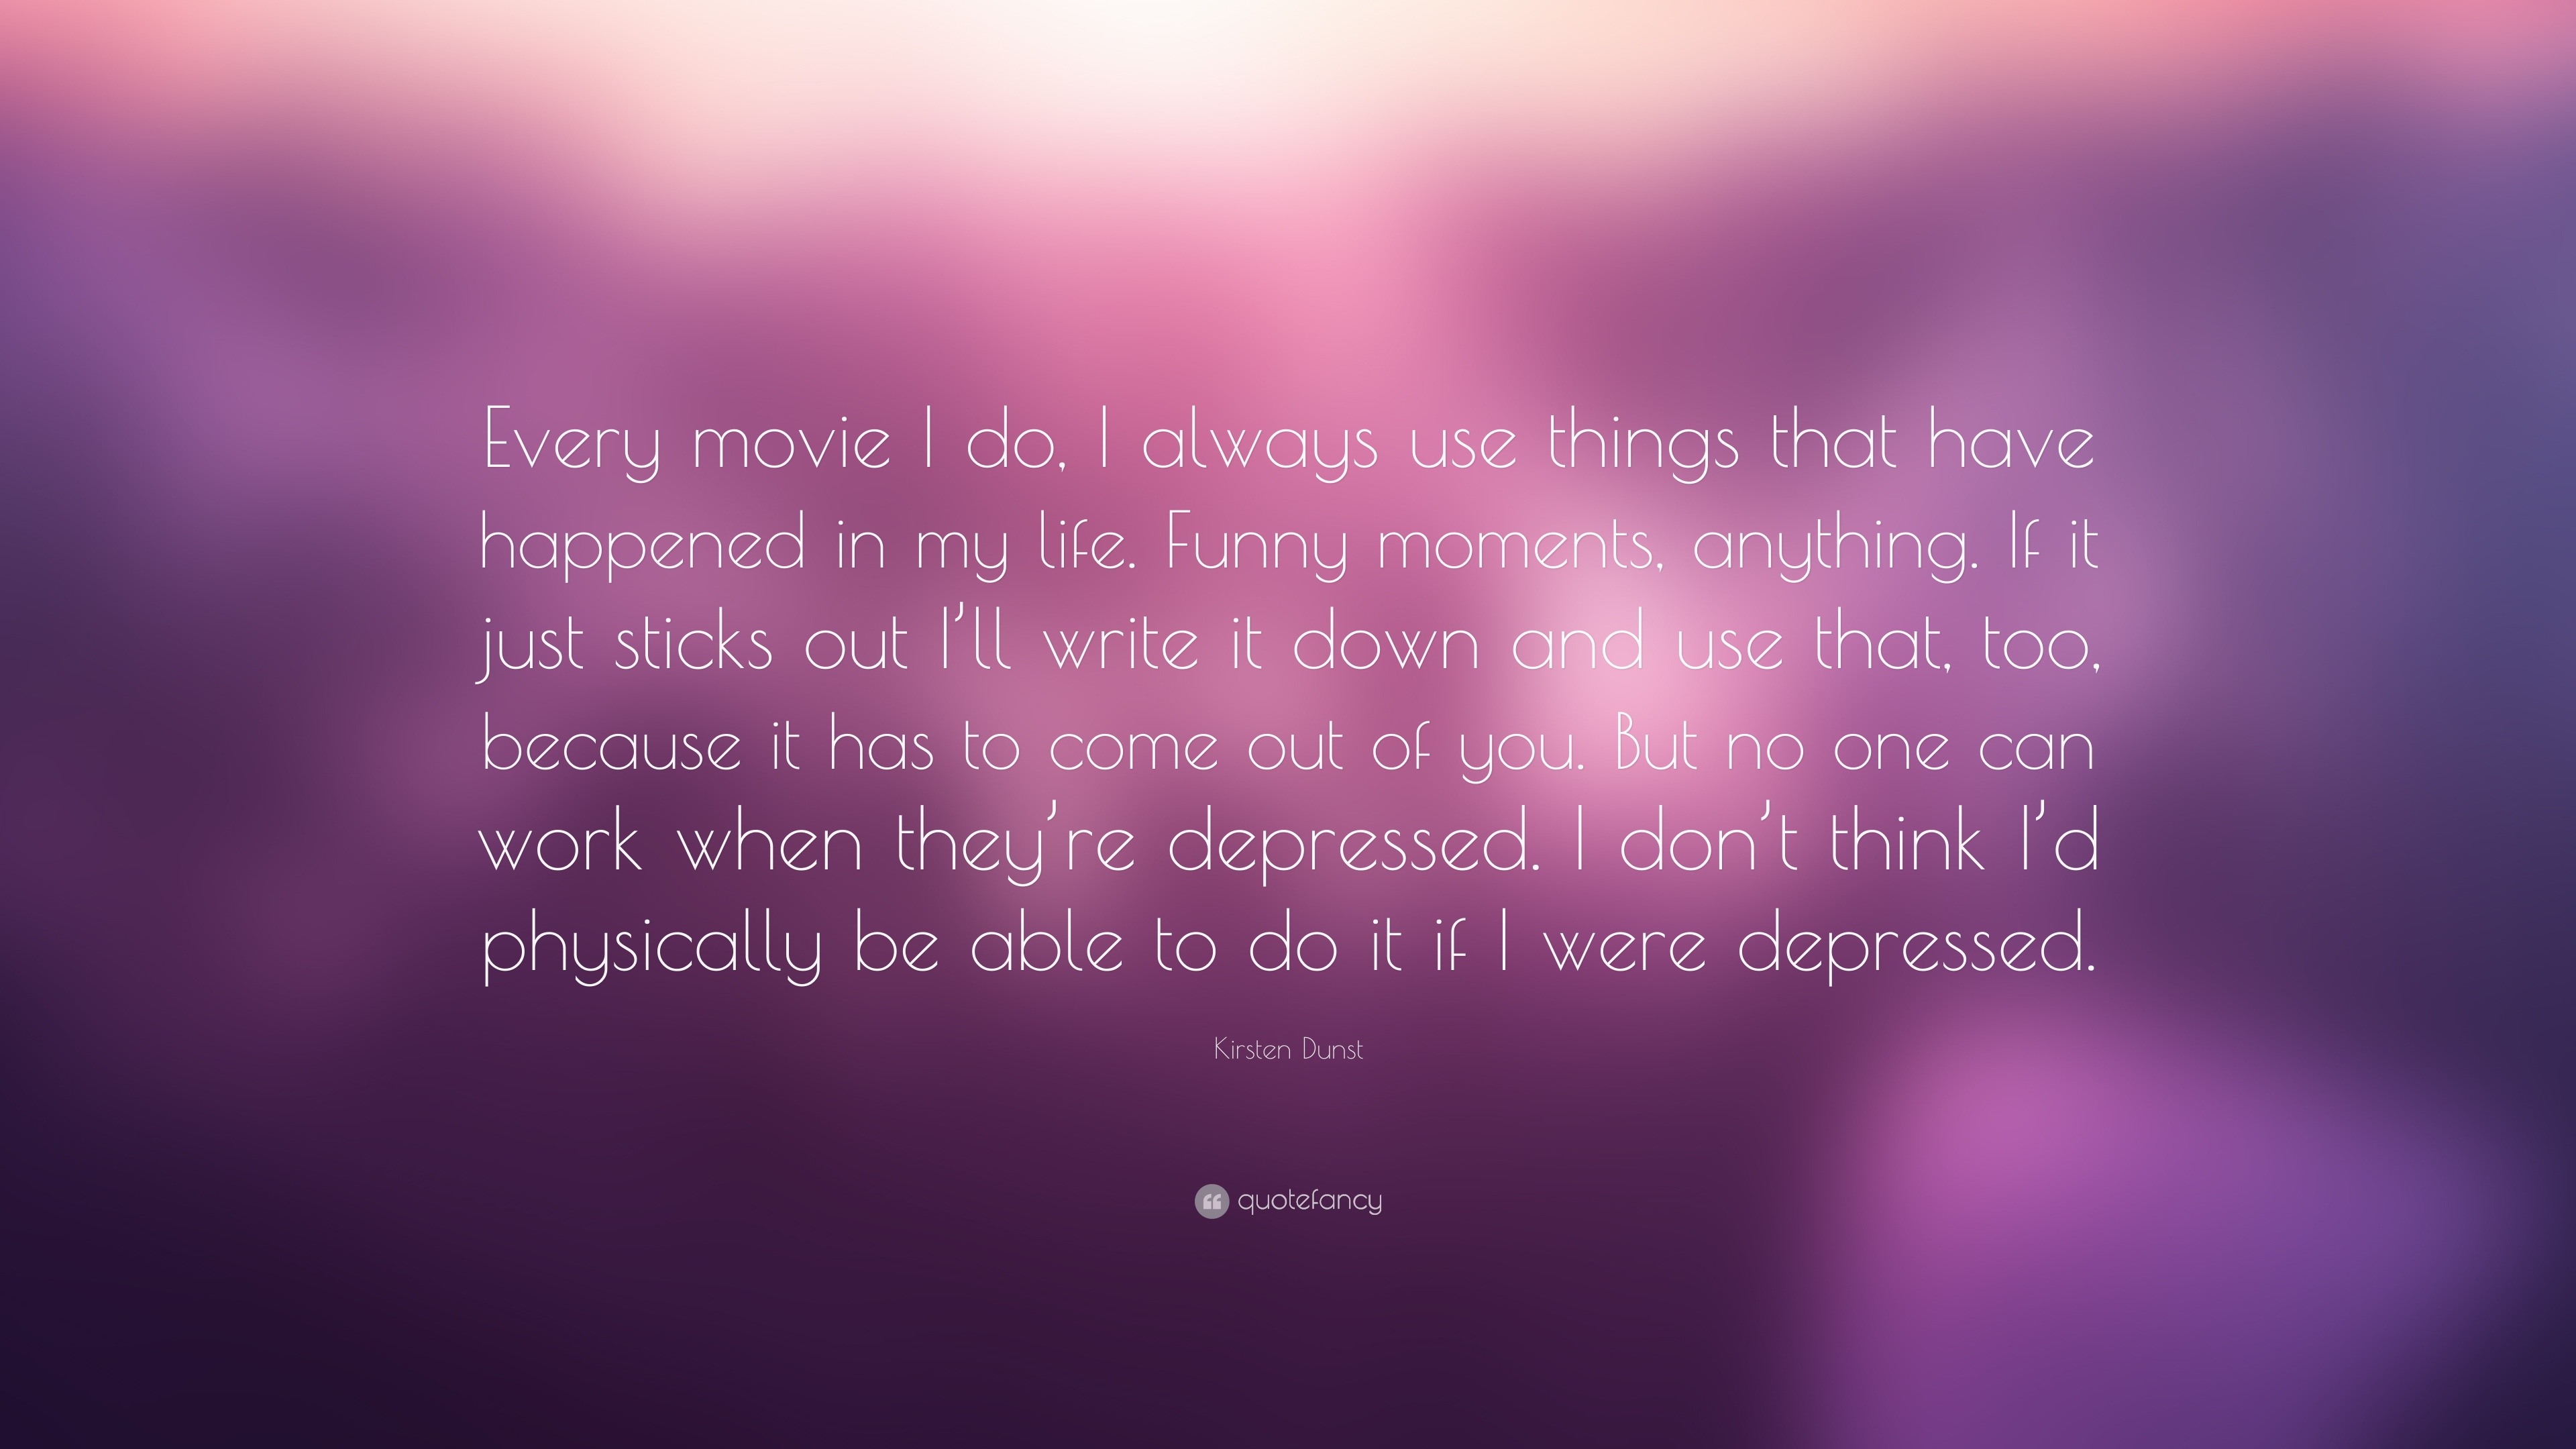 Kirsten Dunst Quote: “Every movie I do, I always use things that have ...